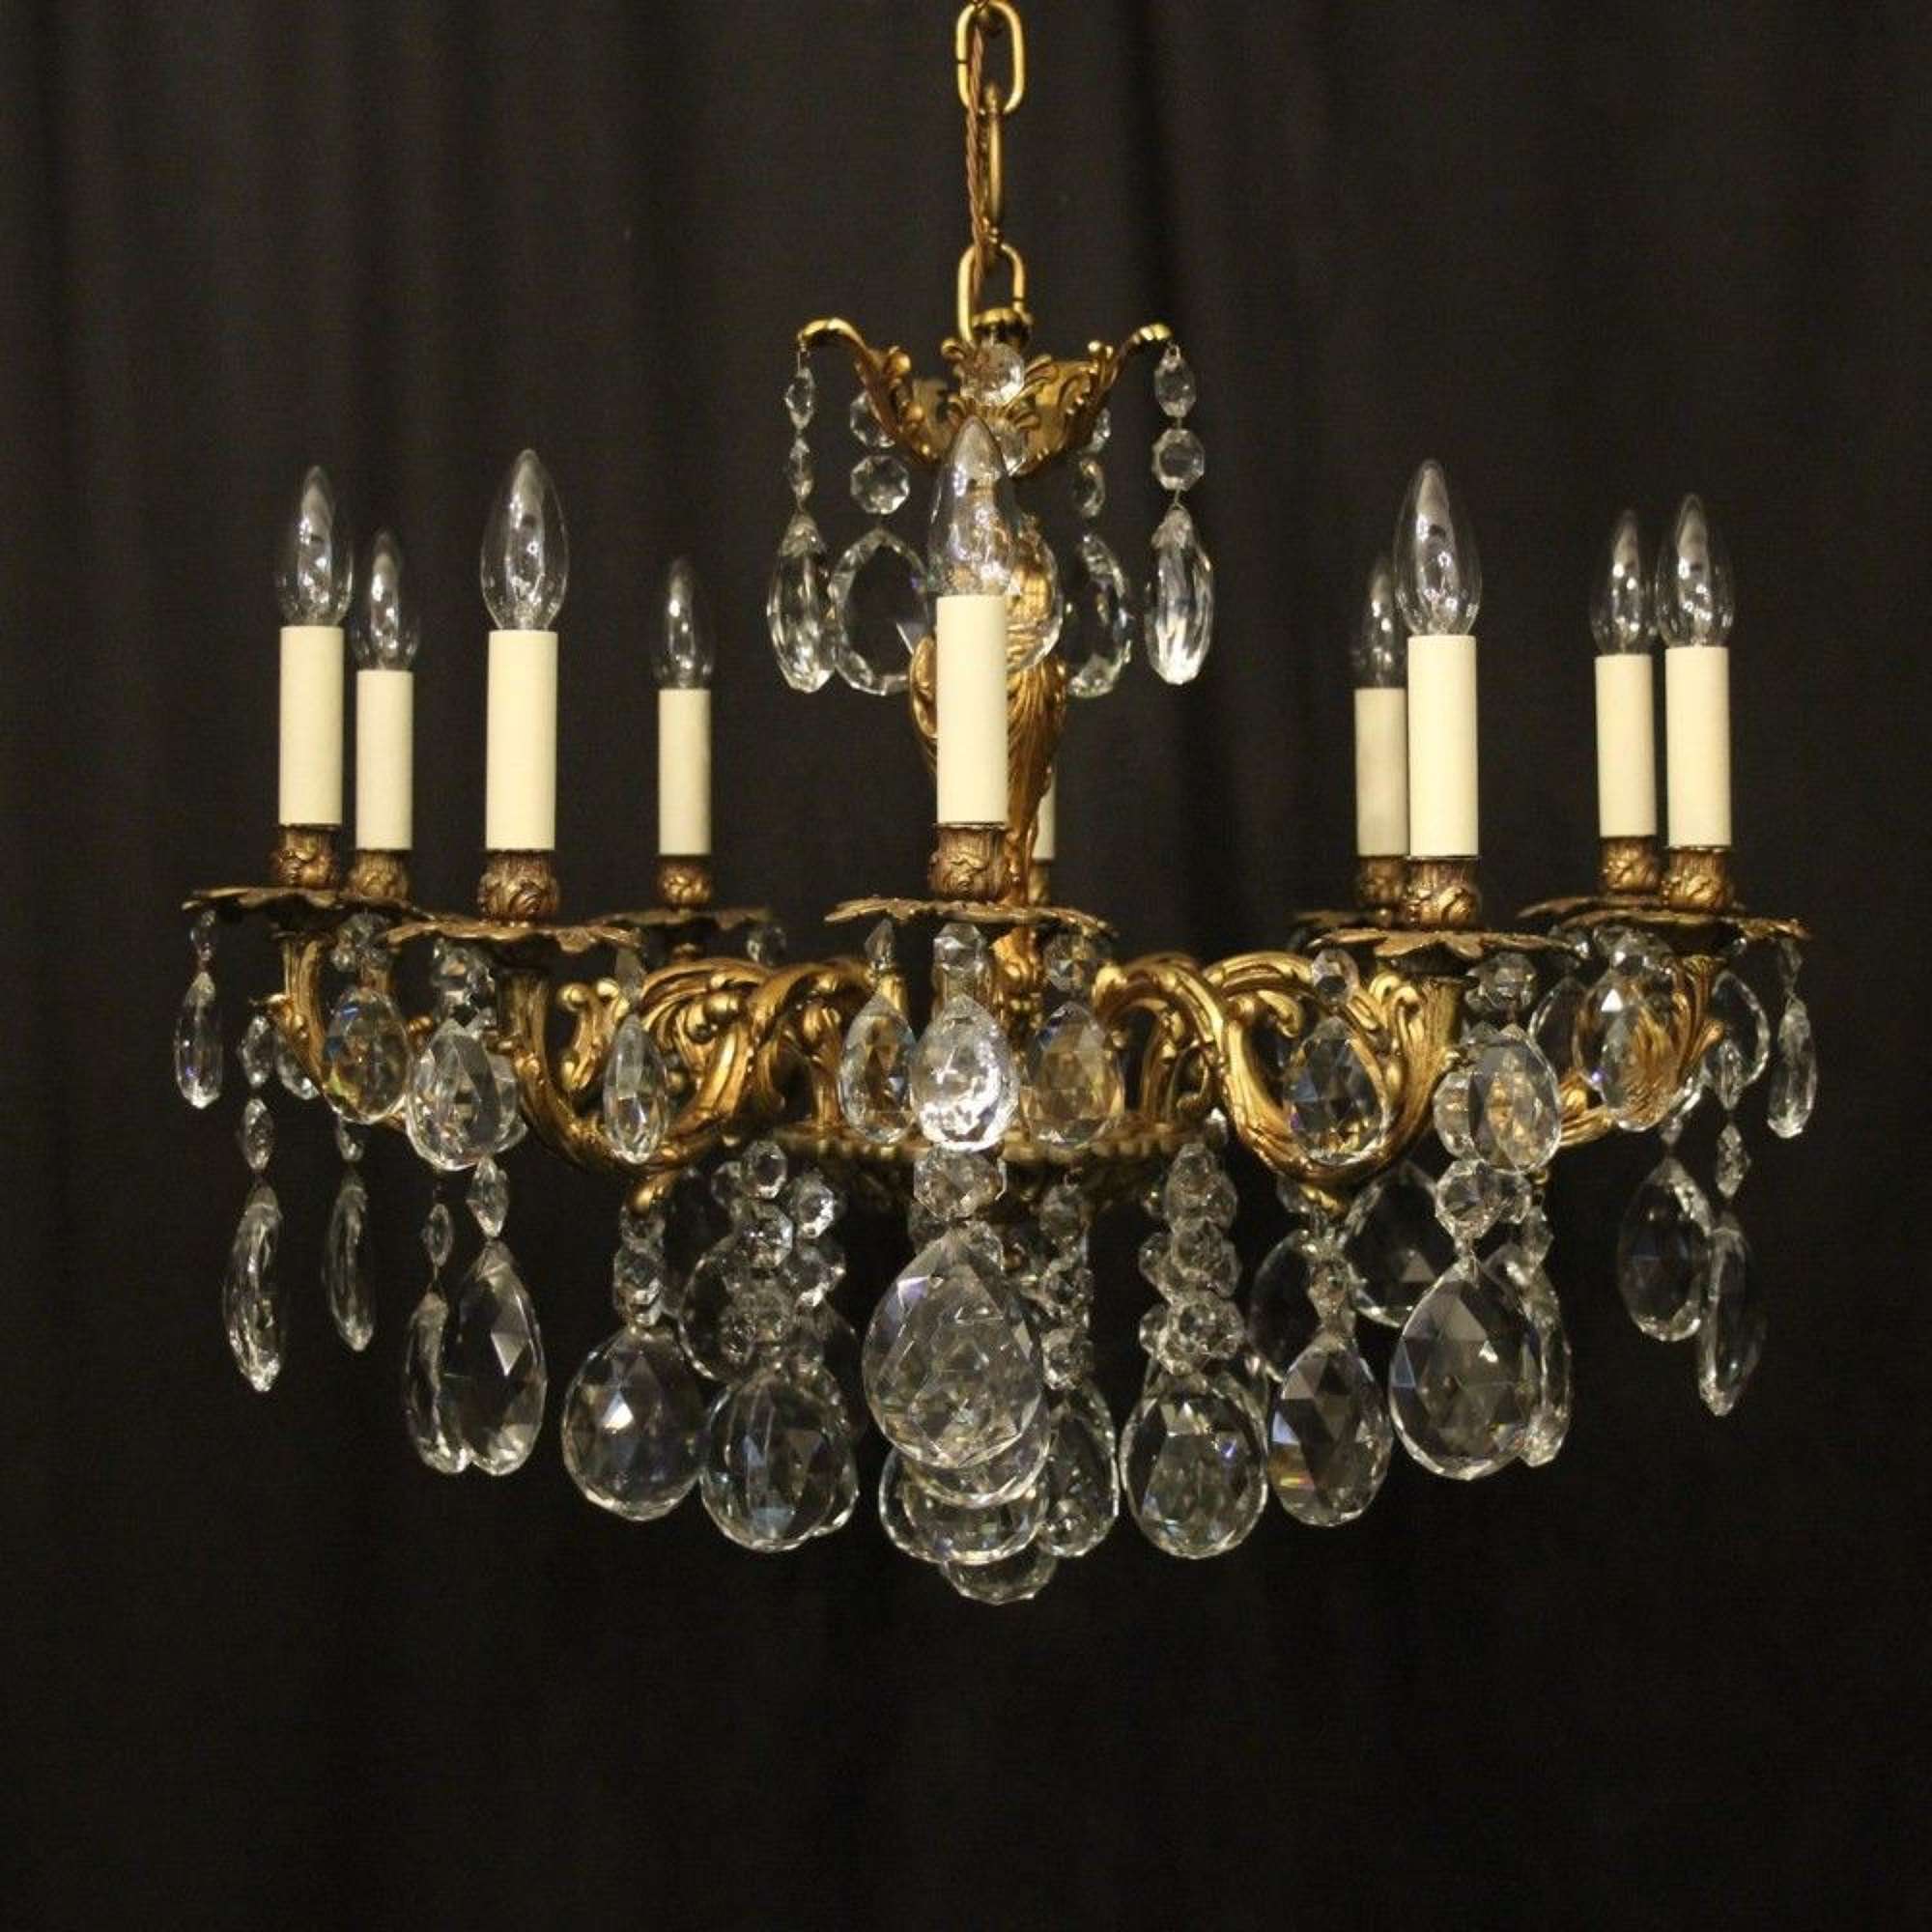 French 10 Light Gilded Bronze & Crystal Antique Chandelier